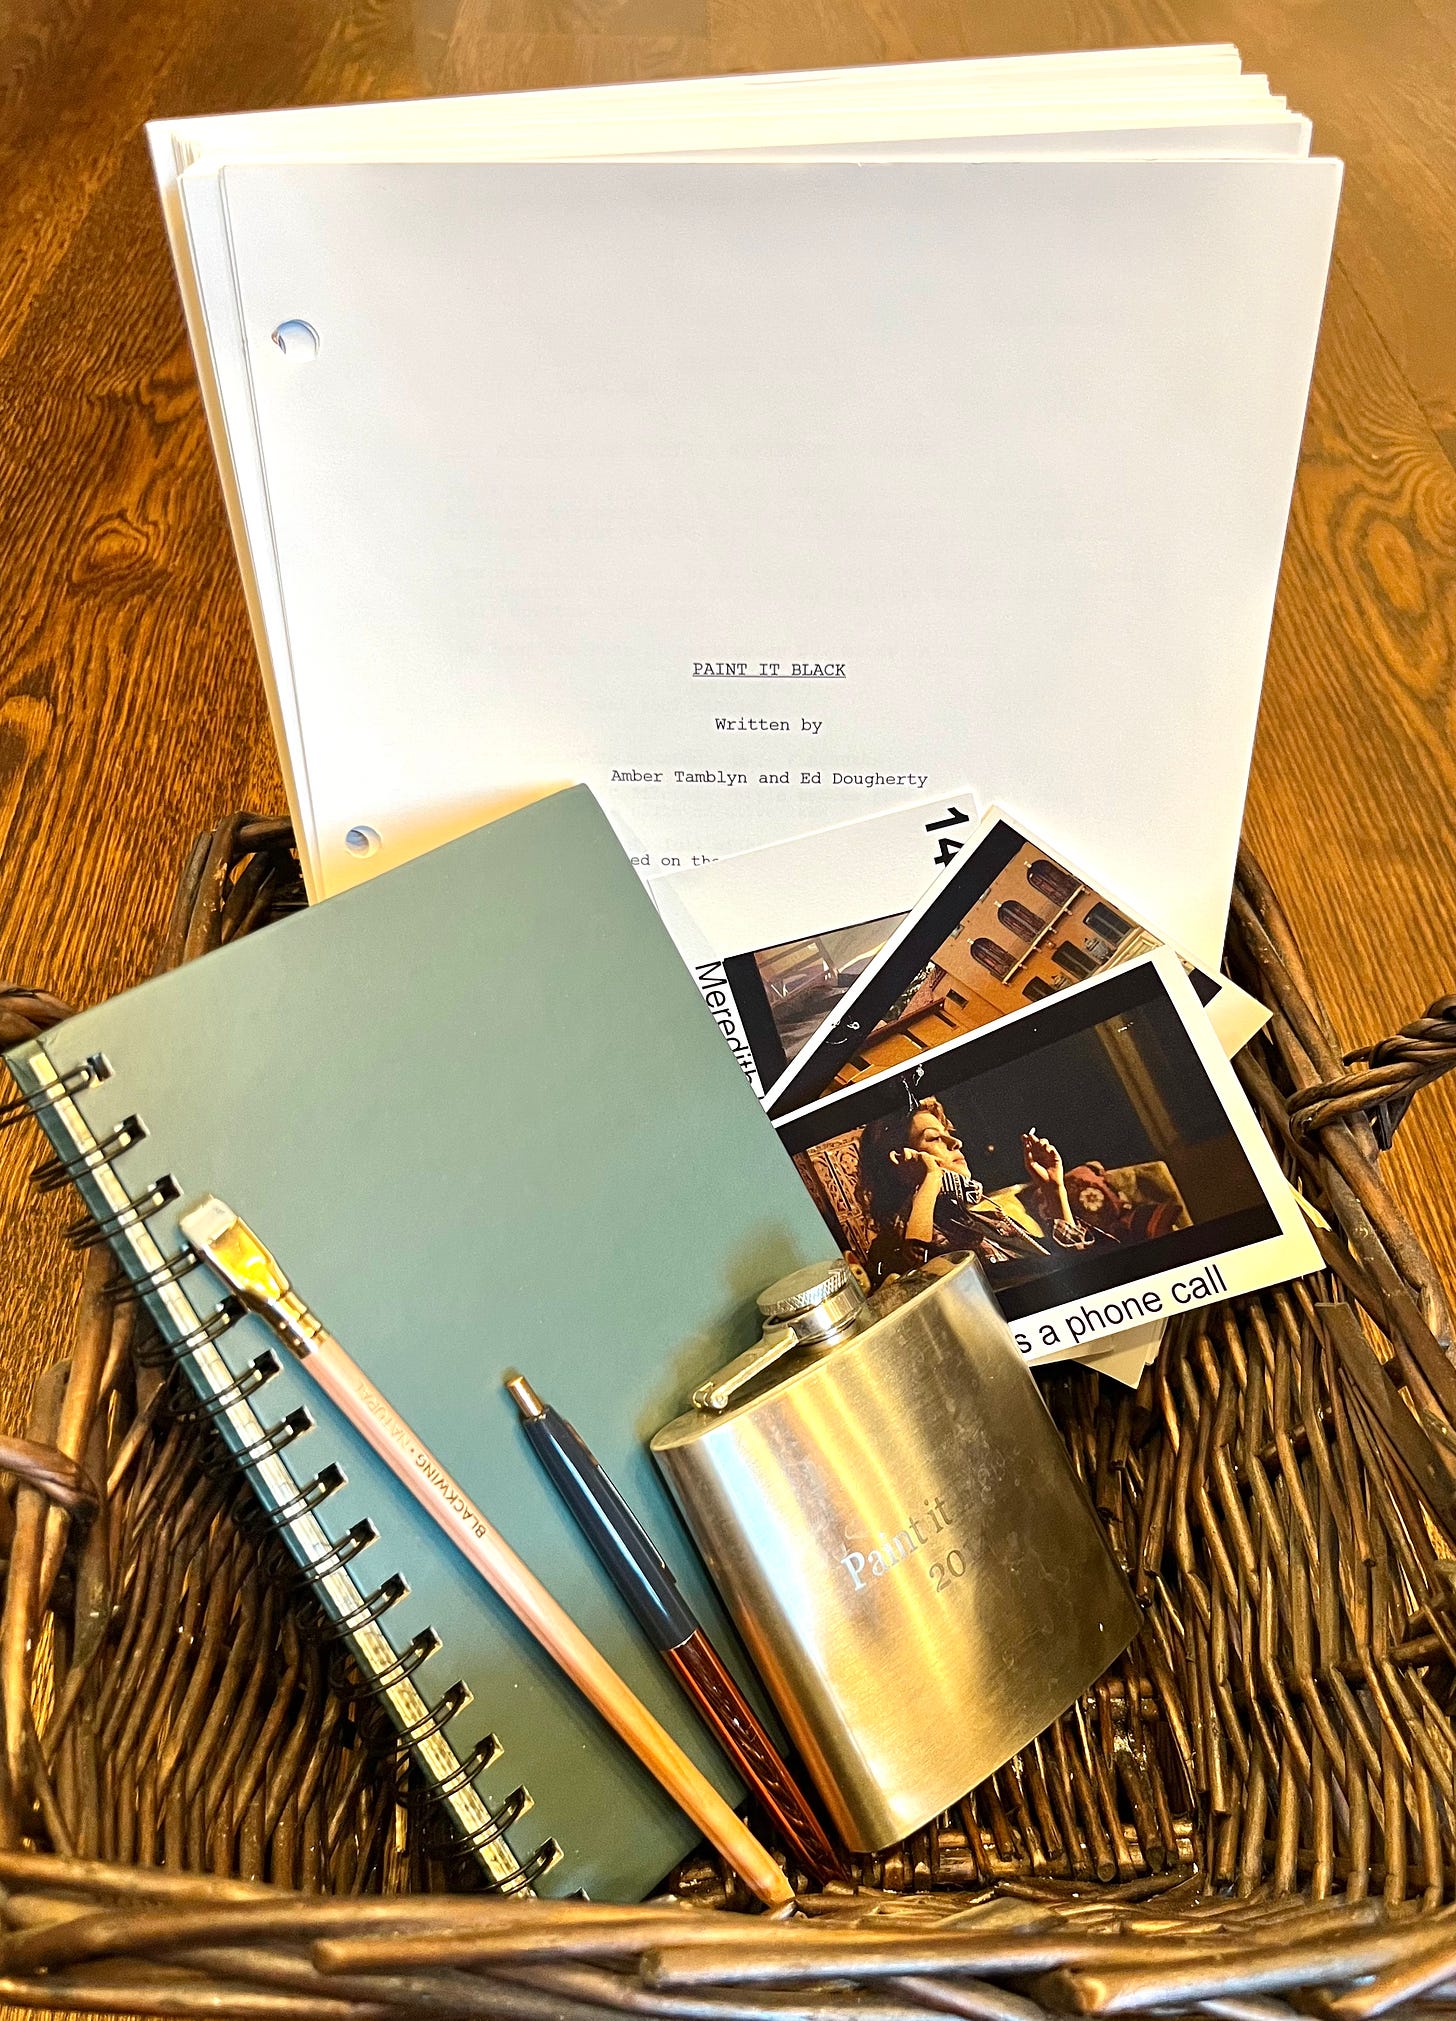 The giveaway bundle. The Paint It Black script, a journal, writing utensils, photos from set, and a flask are arranged in a basket.